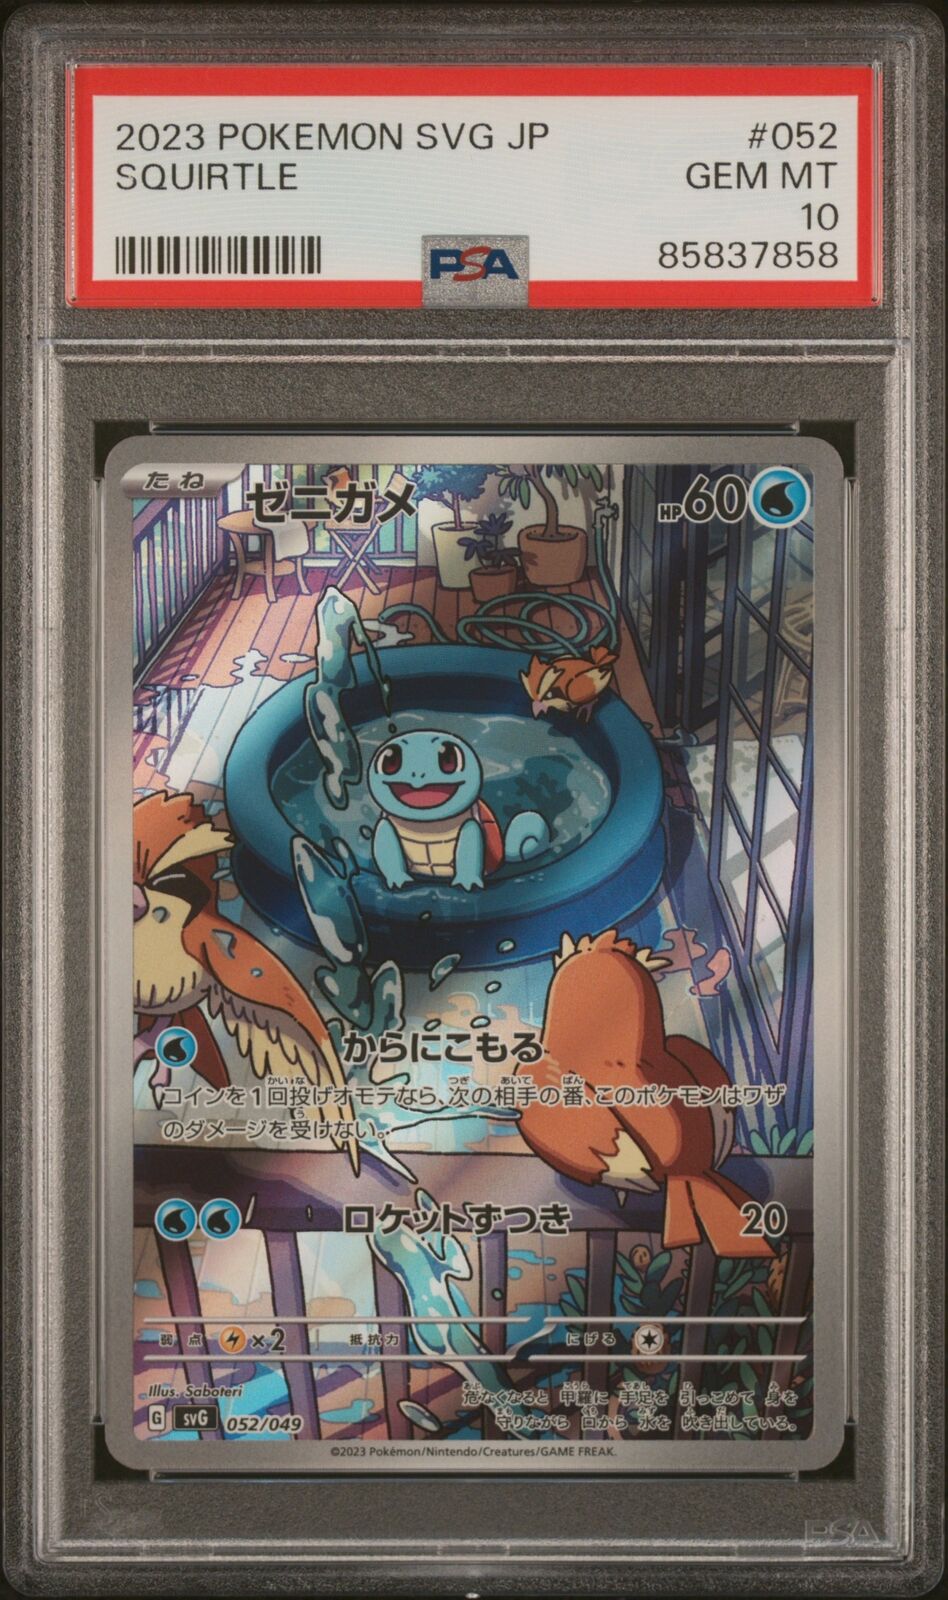 PSA 10 GEM MINT JAPANESE POKEMON 2023 SQUIRTLE 052/049 SPECIAL 